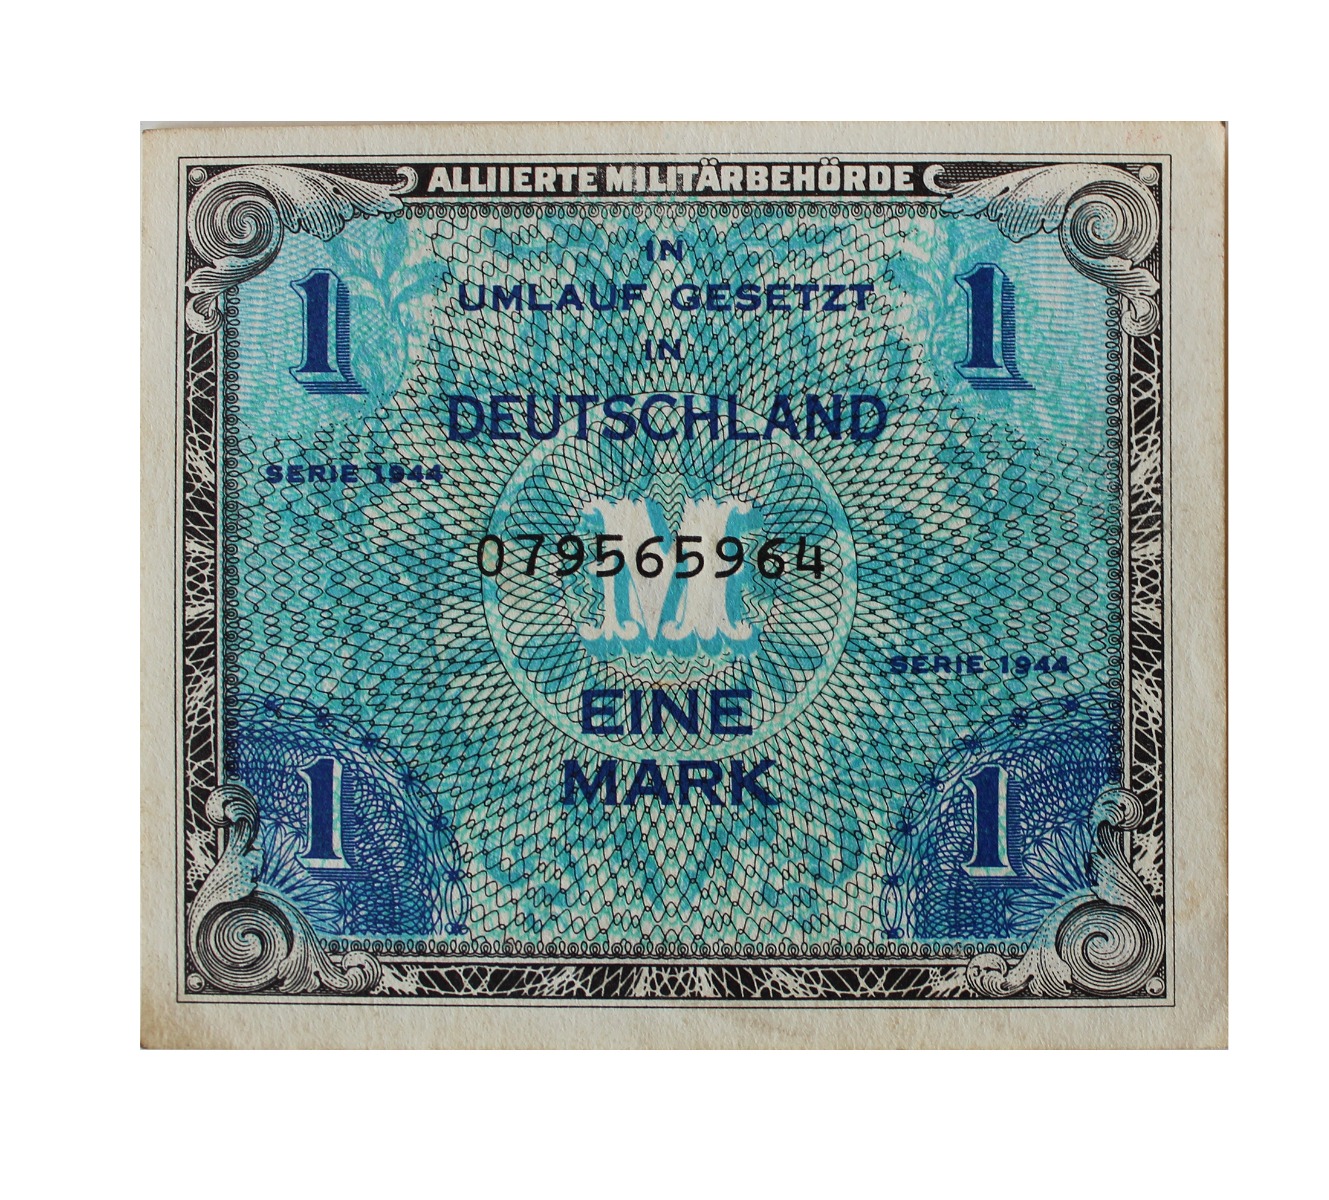 ALLIED MILITARY CURRENCY, 1 (EINE) MARK 1944 FOR USED IN OCCUPIED GERMANY 